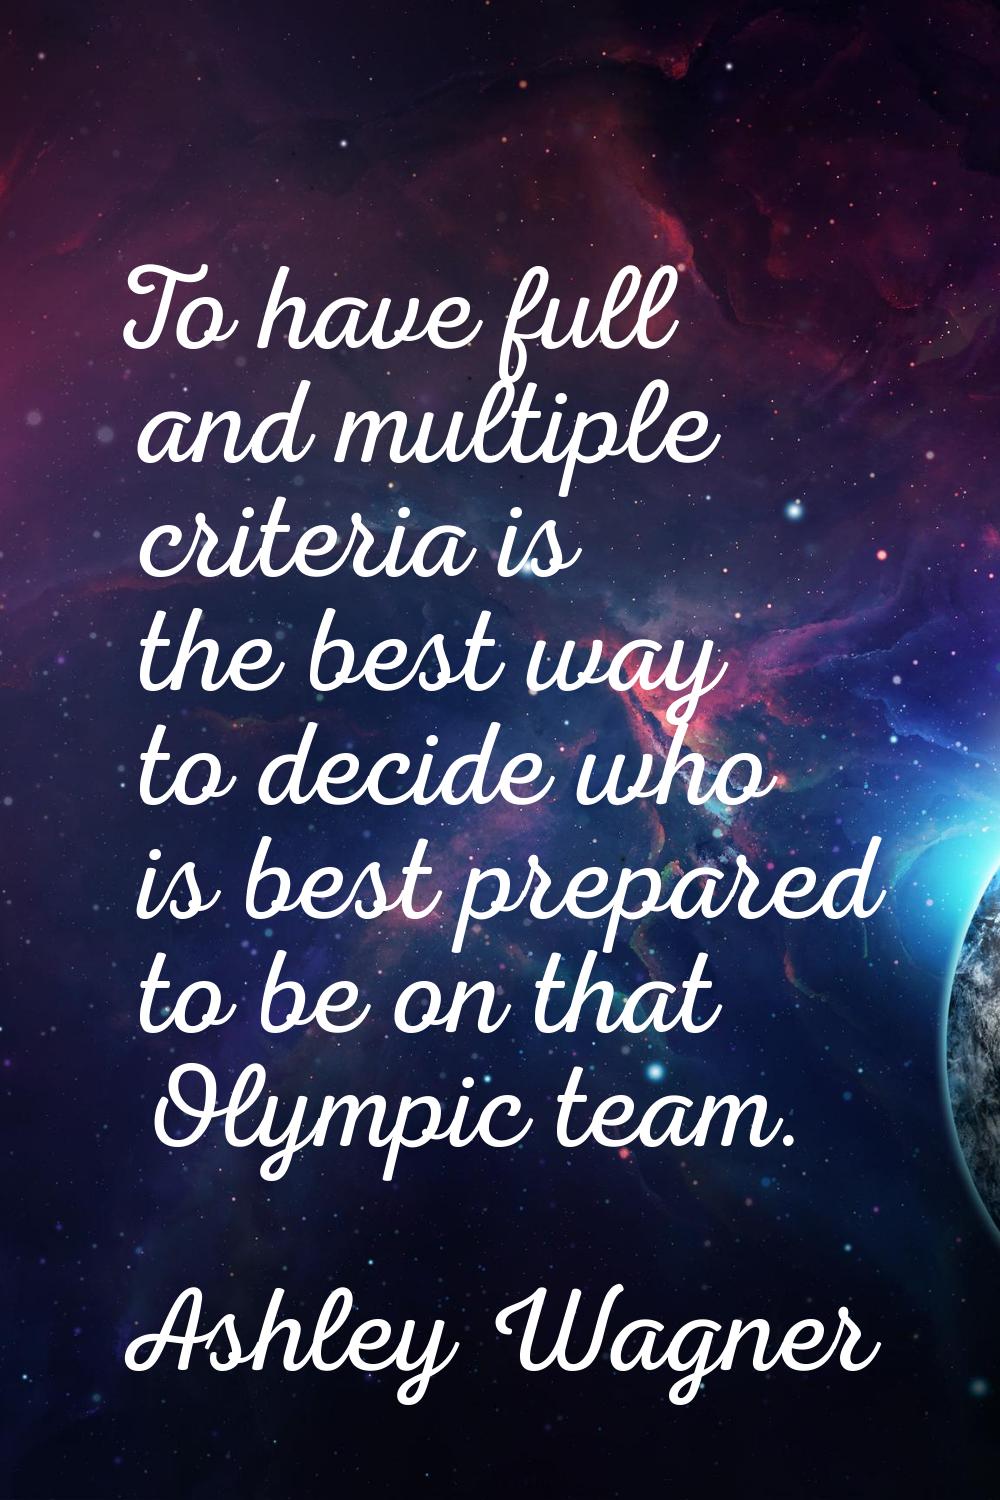 To have full and multiple criteria is the best way to decide who is best prepared to be on that Oly